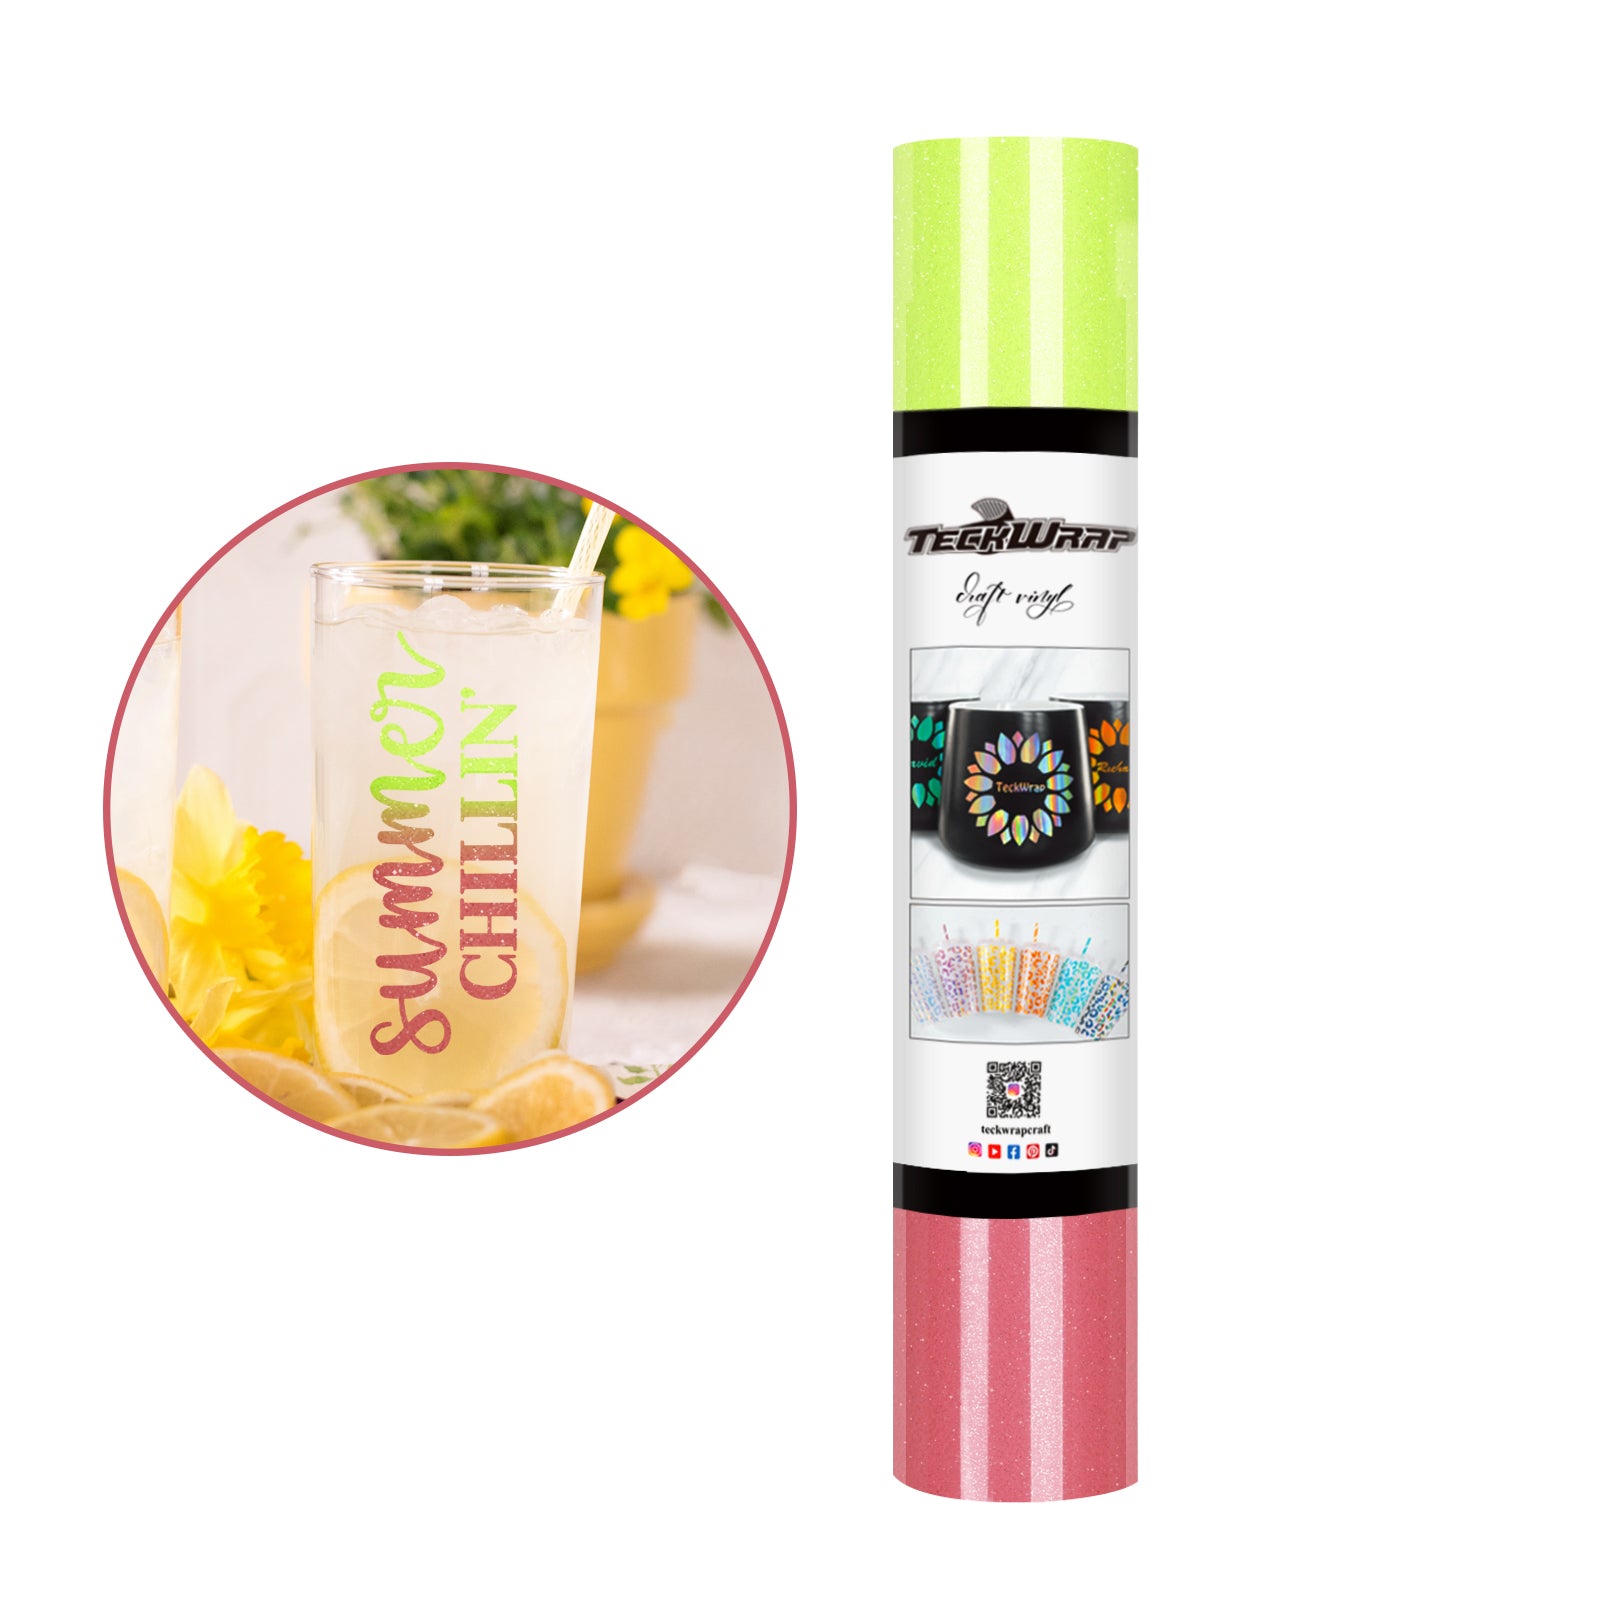 Shimmer Cold Color Change Adhesive Vinyl - 5ft / Neon Yellow to Mineral Red - TeckwrapCraft